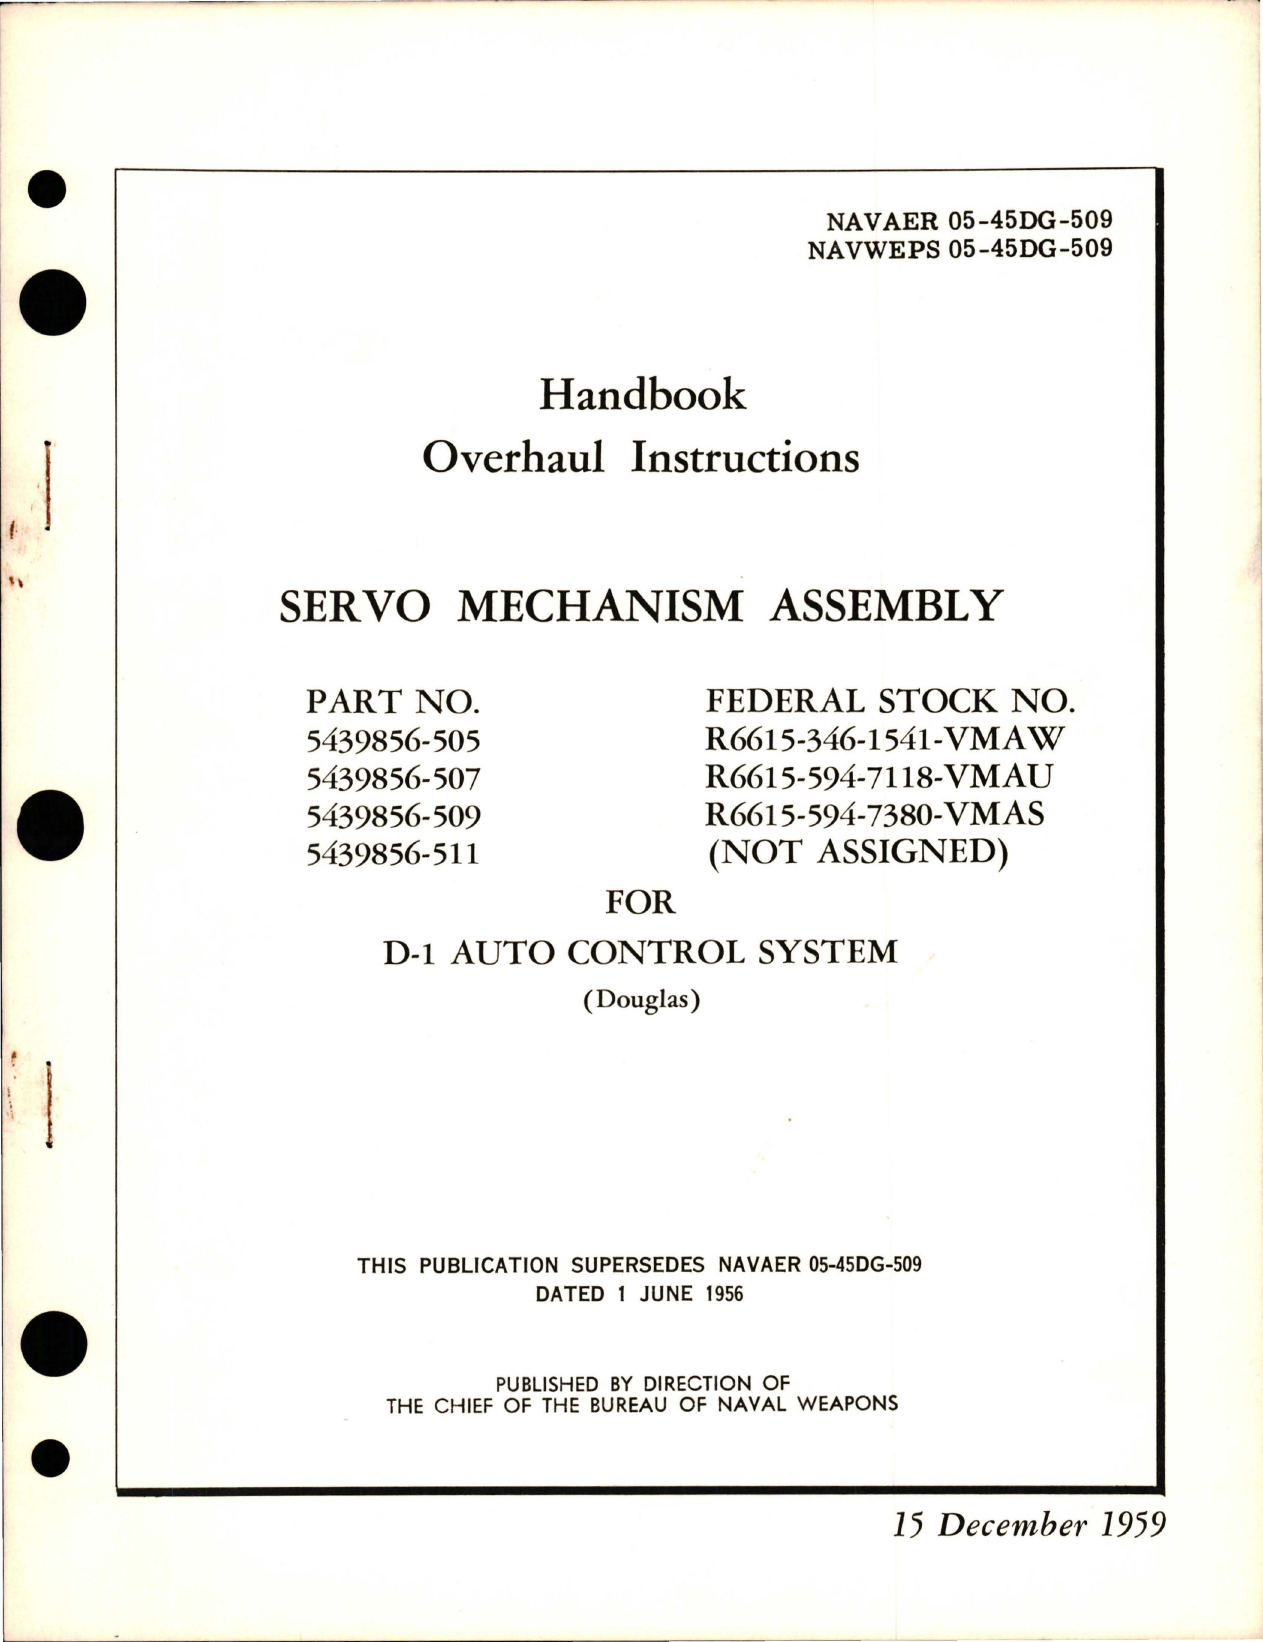 Sample page 1 from AirCorps Library document: Overhaul Instructions for Servo Mechanism Assembly for D-1 Auto Control System